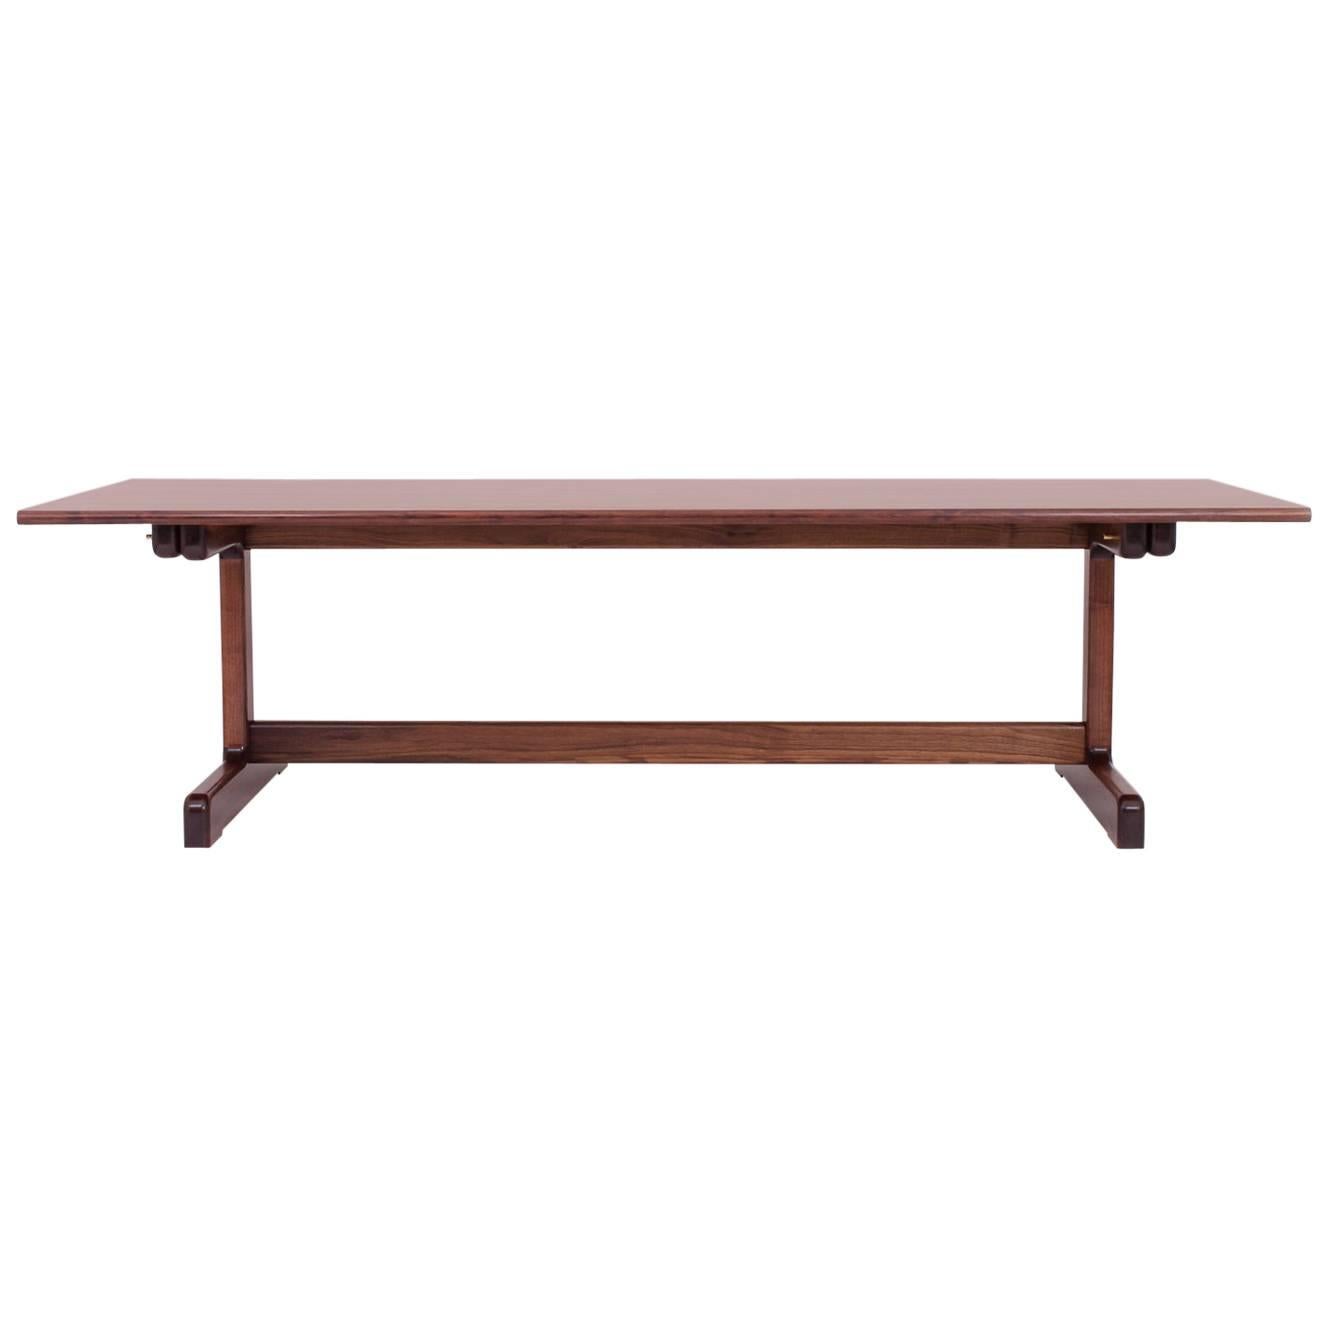 The Physalia dining table is the perfect centre piece to a home or office's communal space. [Other woods available]. The clean lines provide a blank canvas for the everyday, while the soft curves feel equally smooth under your forearms or your